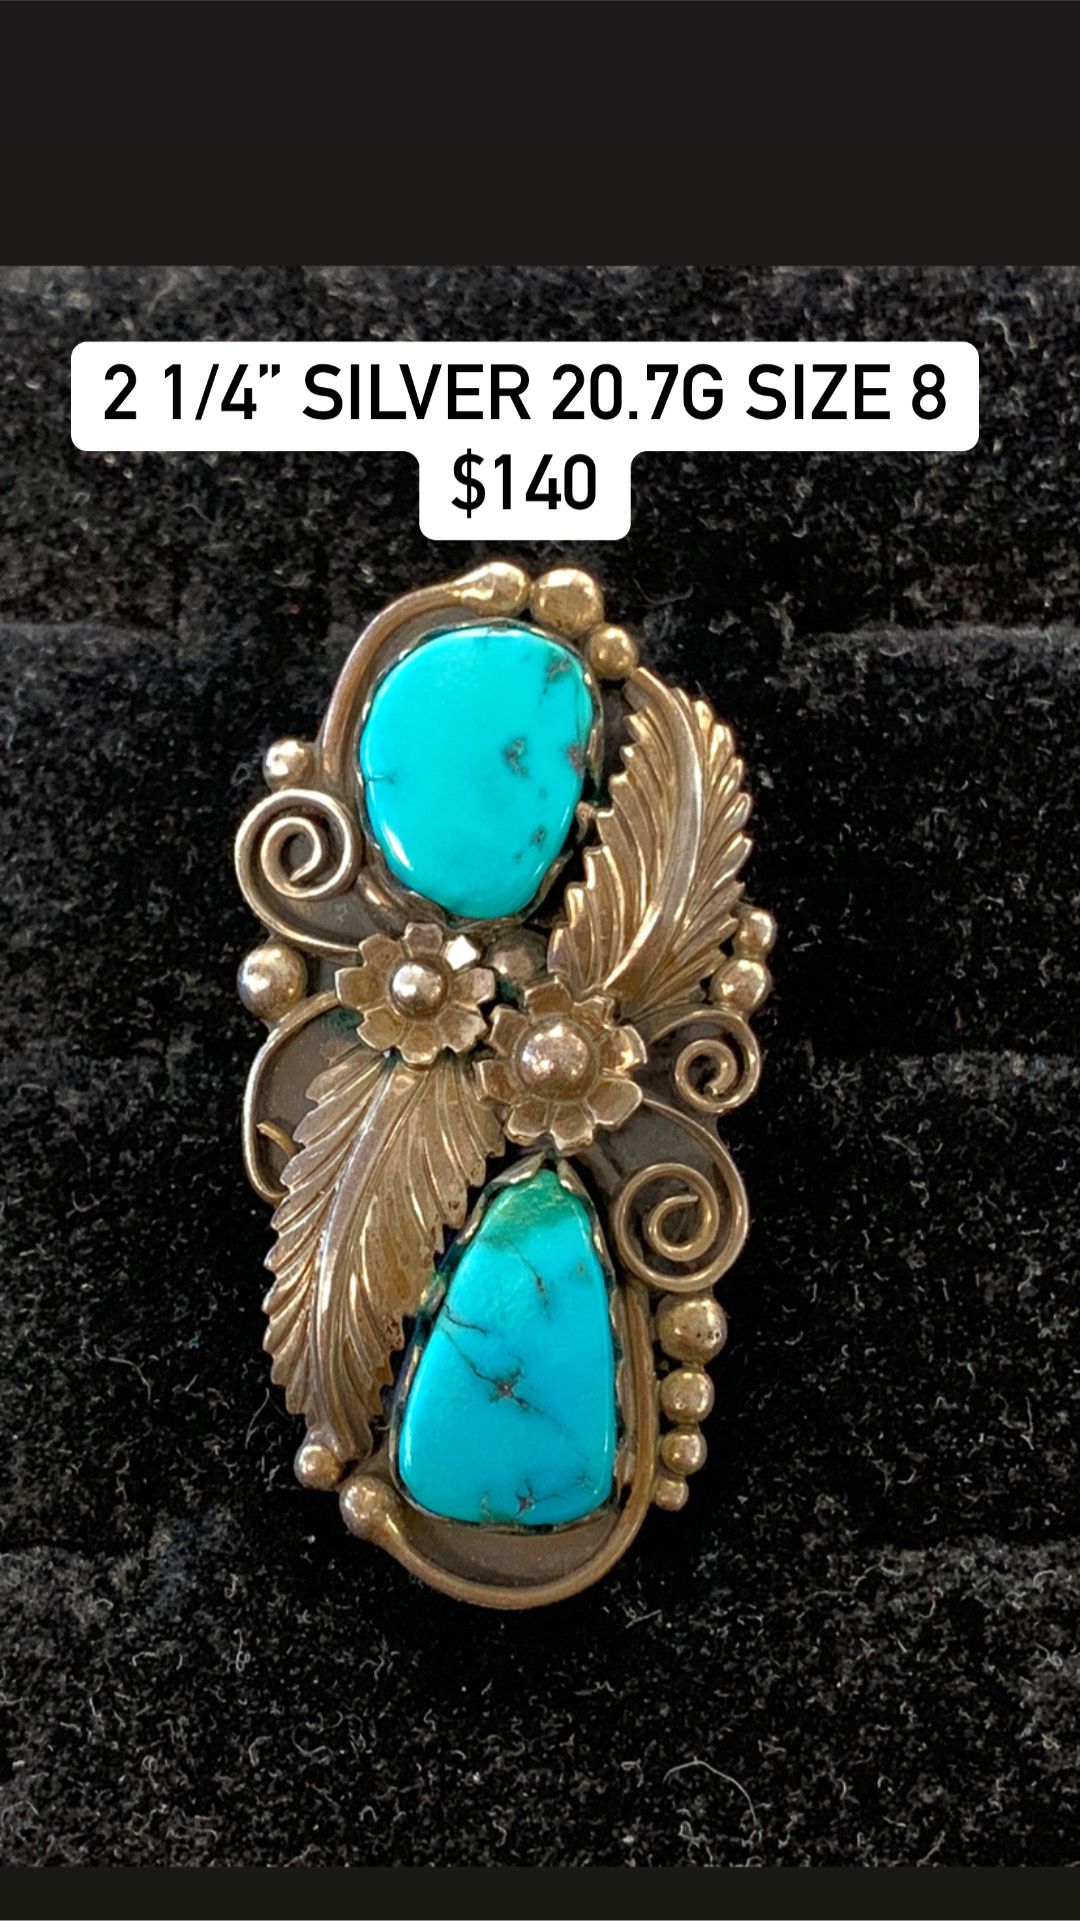 Silver & Turquoise Ring #25678